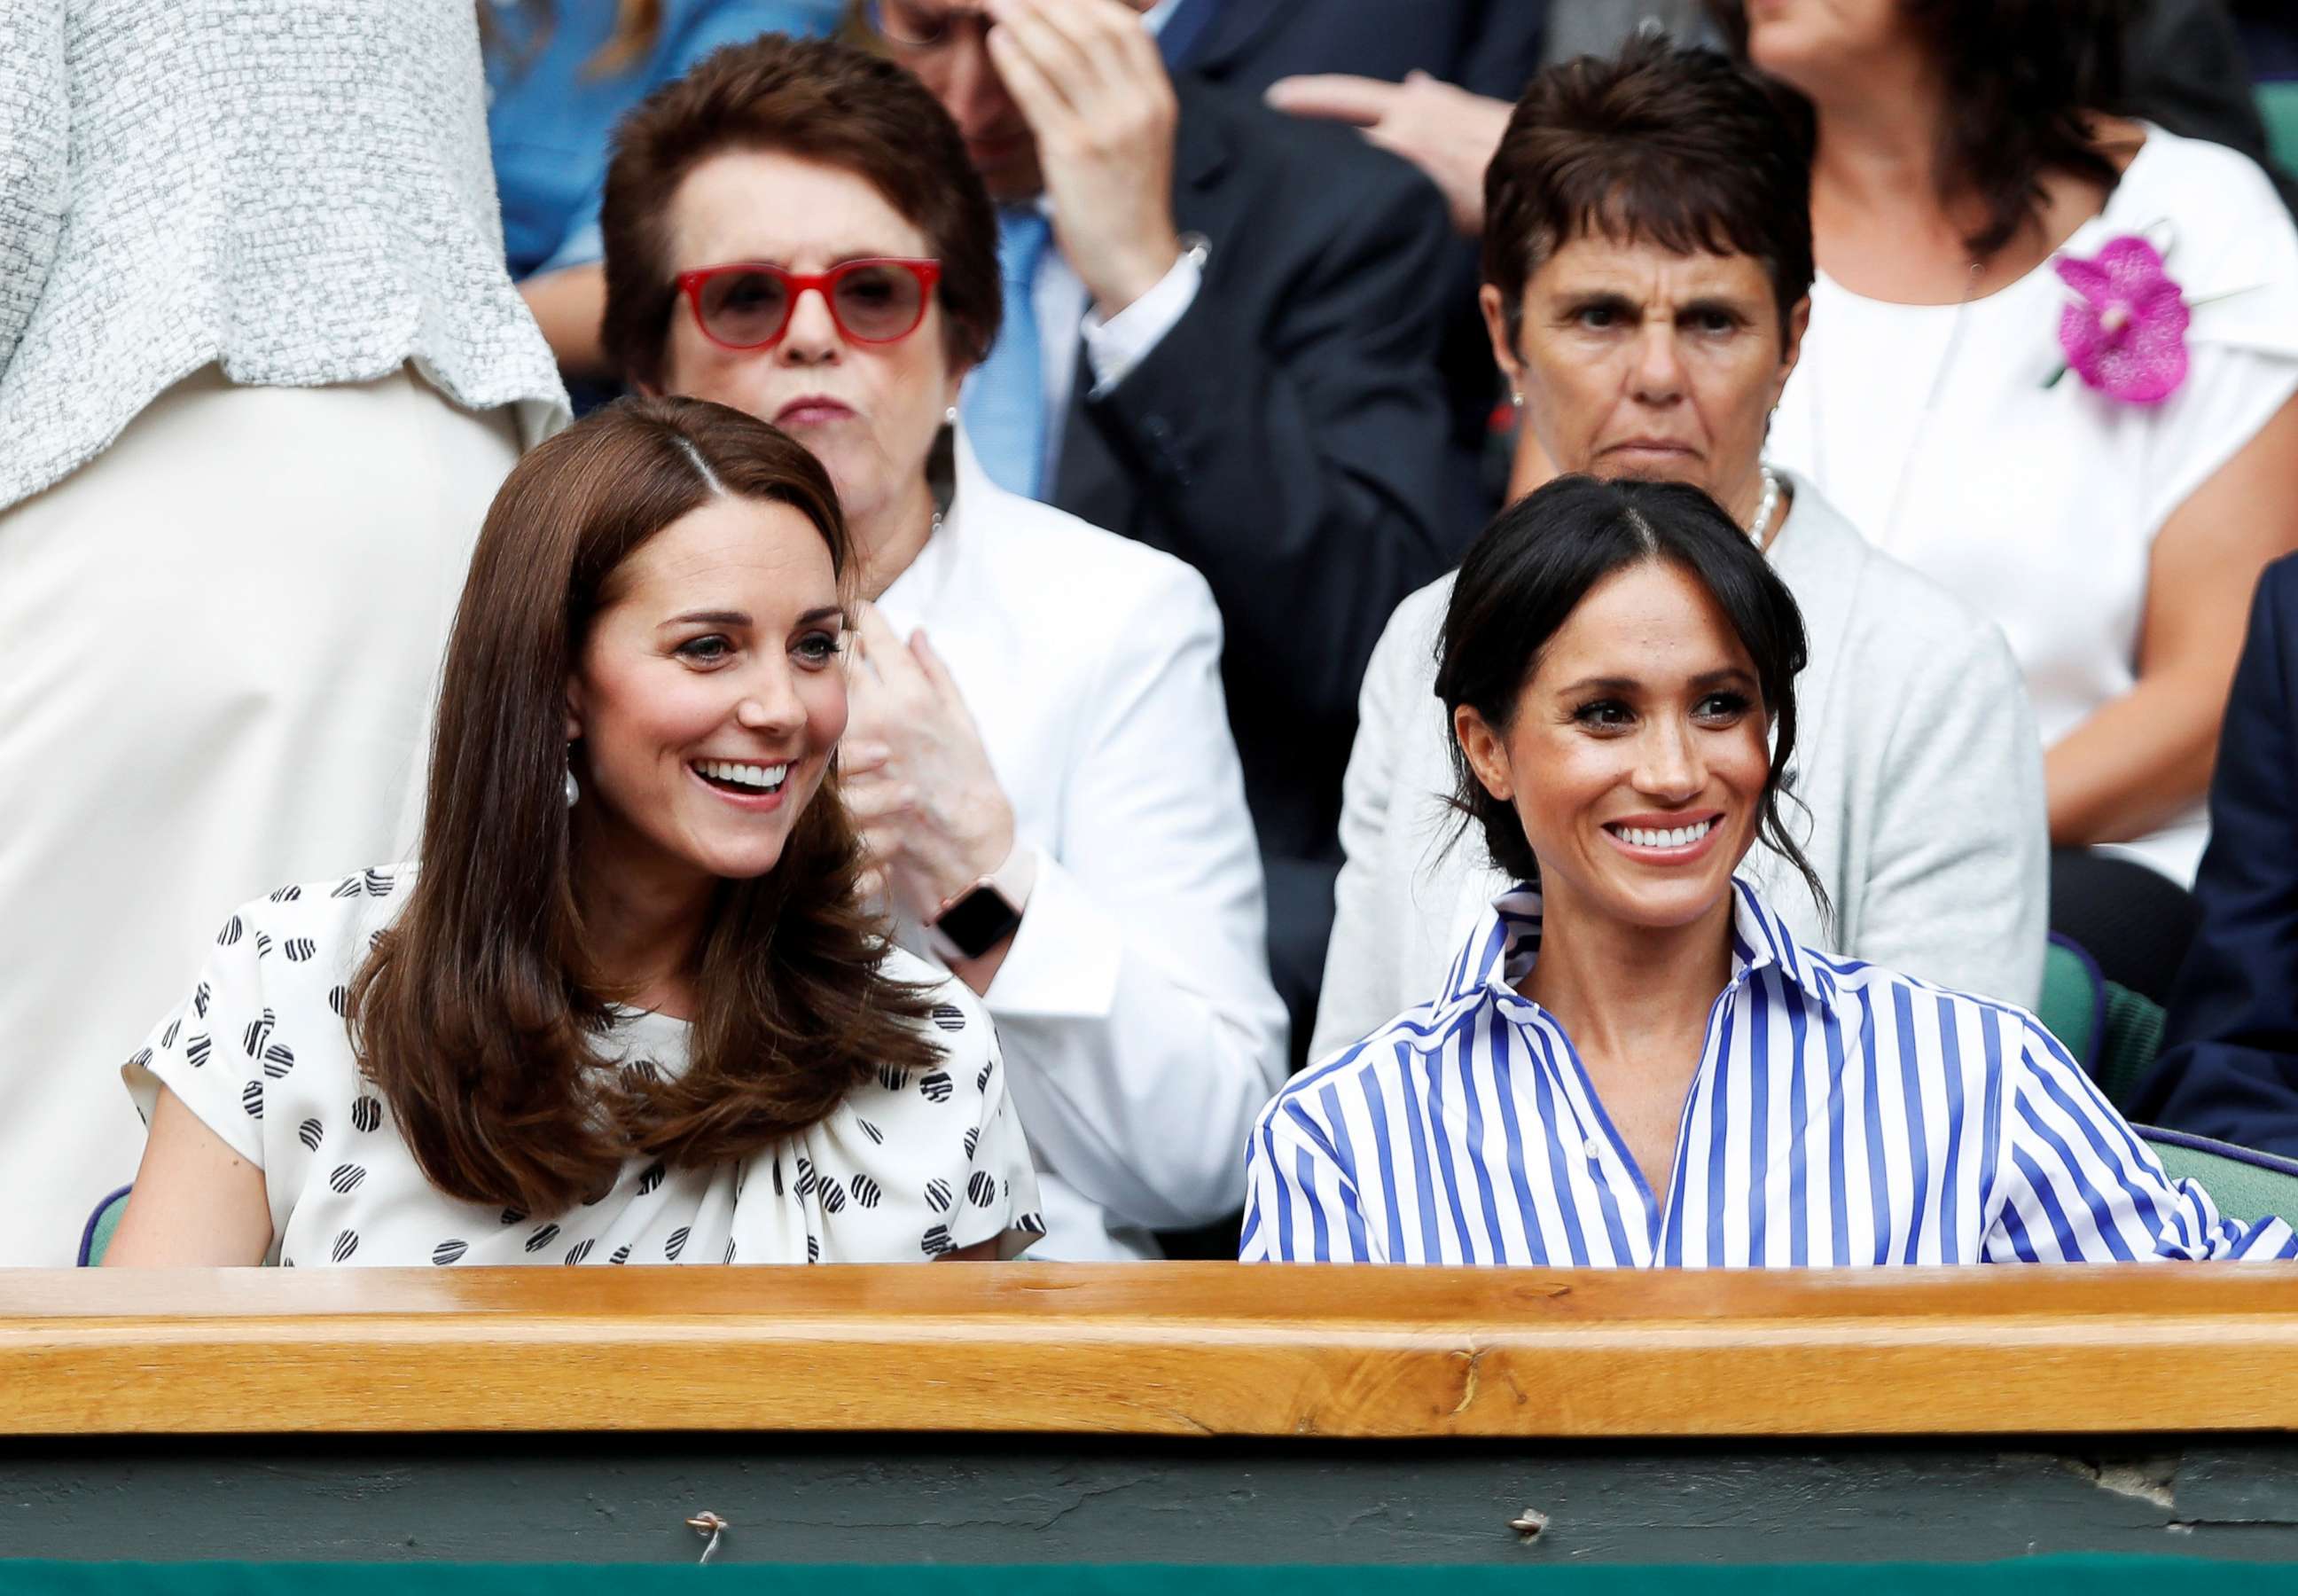 PHOTO: Britain's Catherine, Duchess of Cambridge and Meghan, Duchess of Sussex watch Serena Williams of the U.S. play the women's singles final against Germany's Angelique Kerber at All England Lawn Tennis and Croquet Club in London, July 14, 2018.